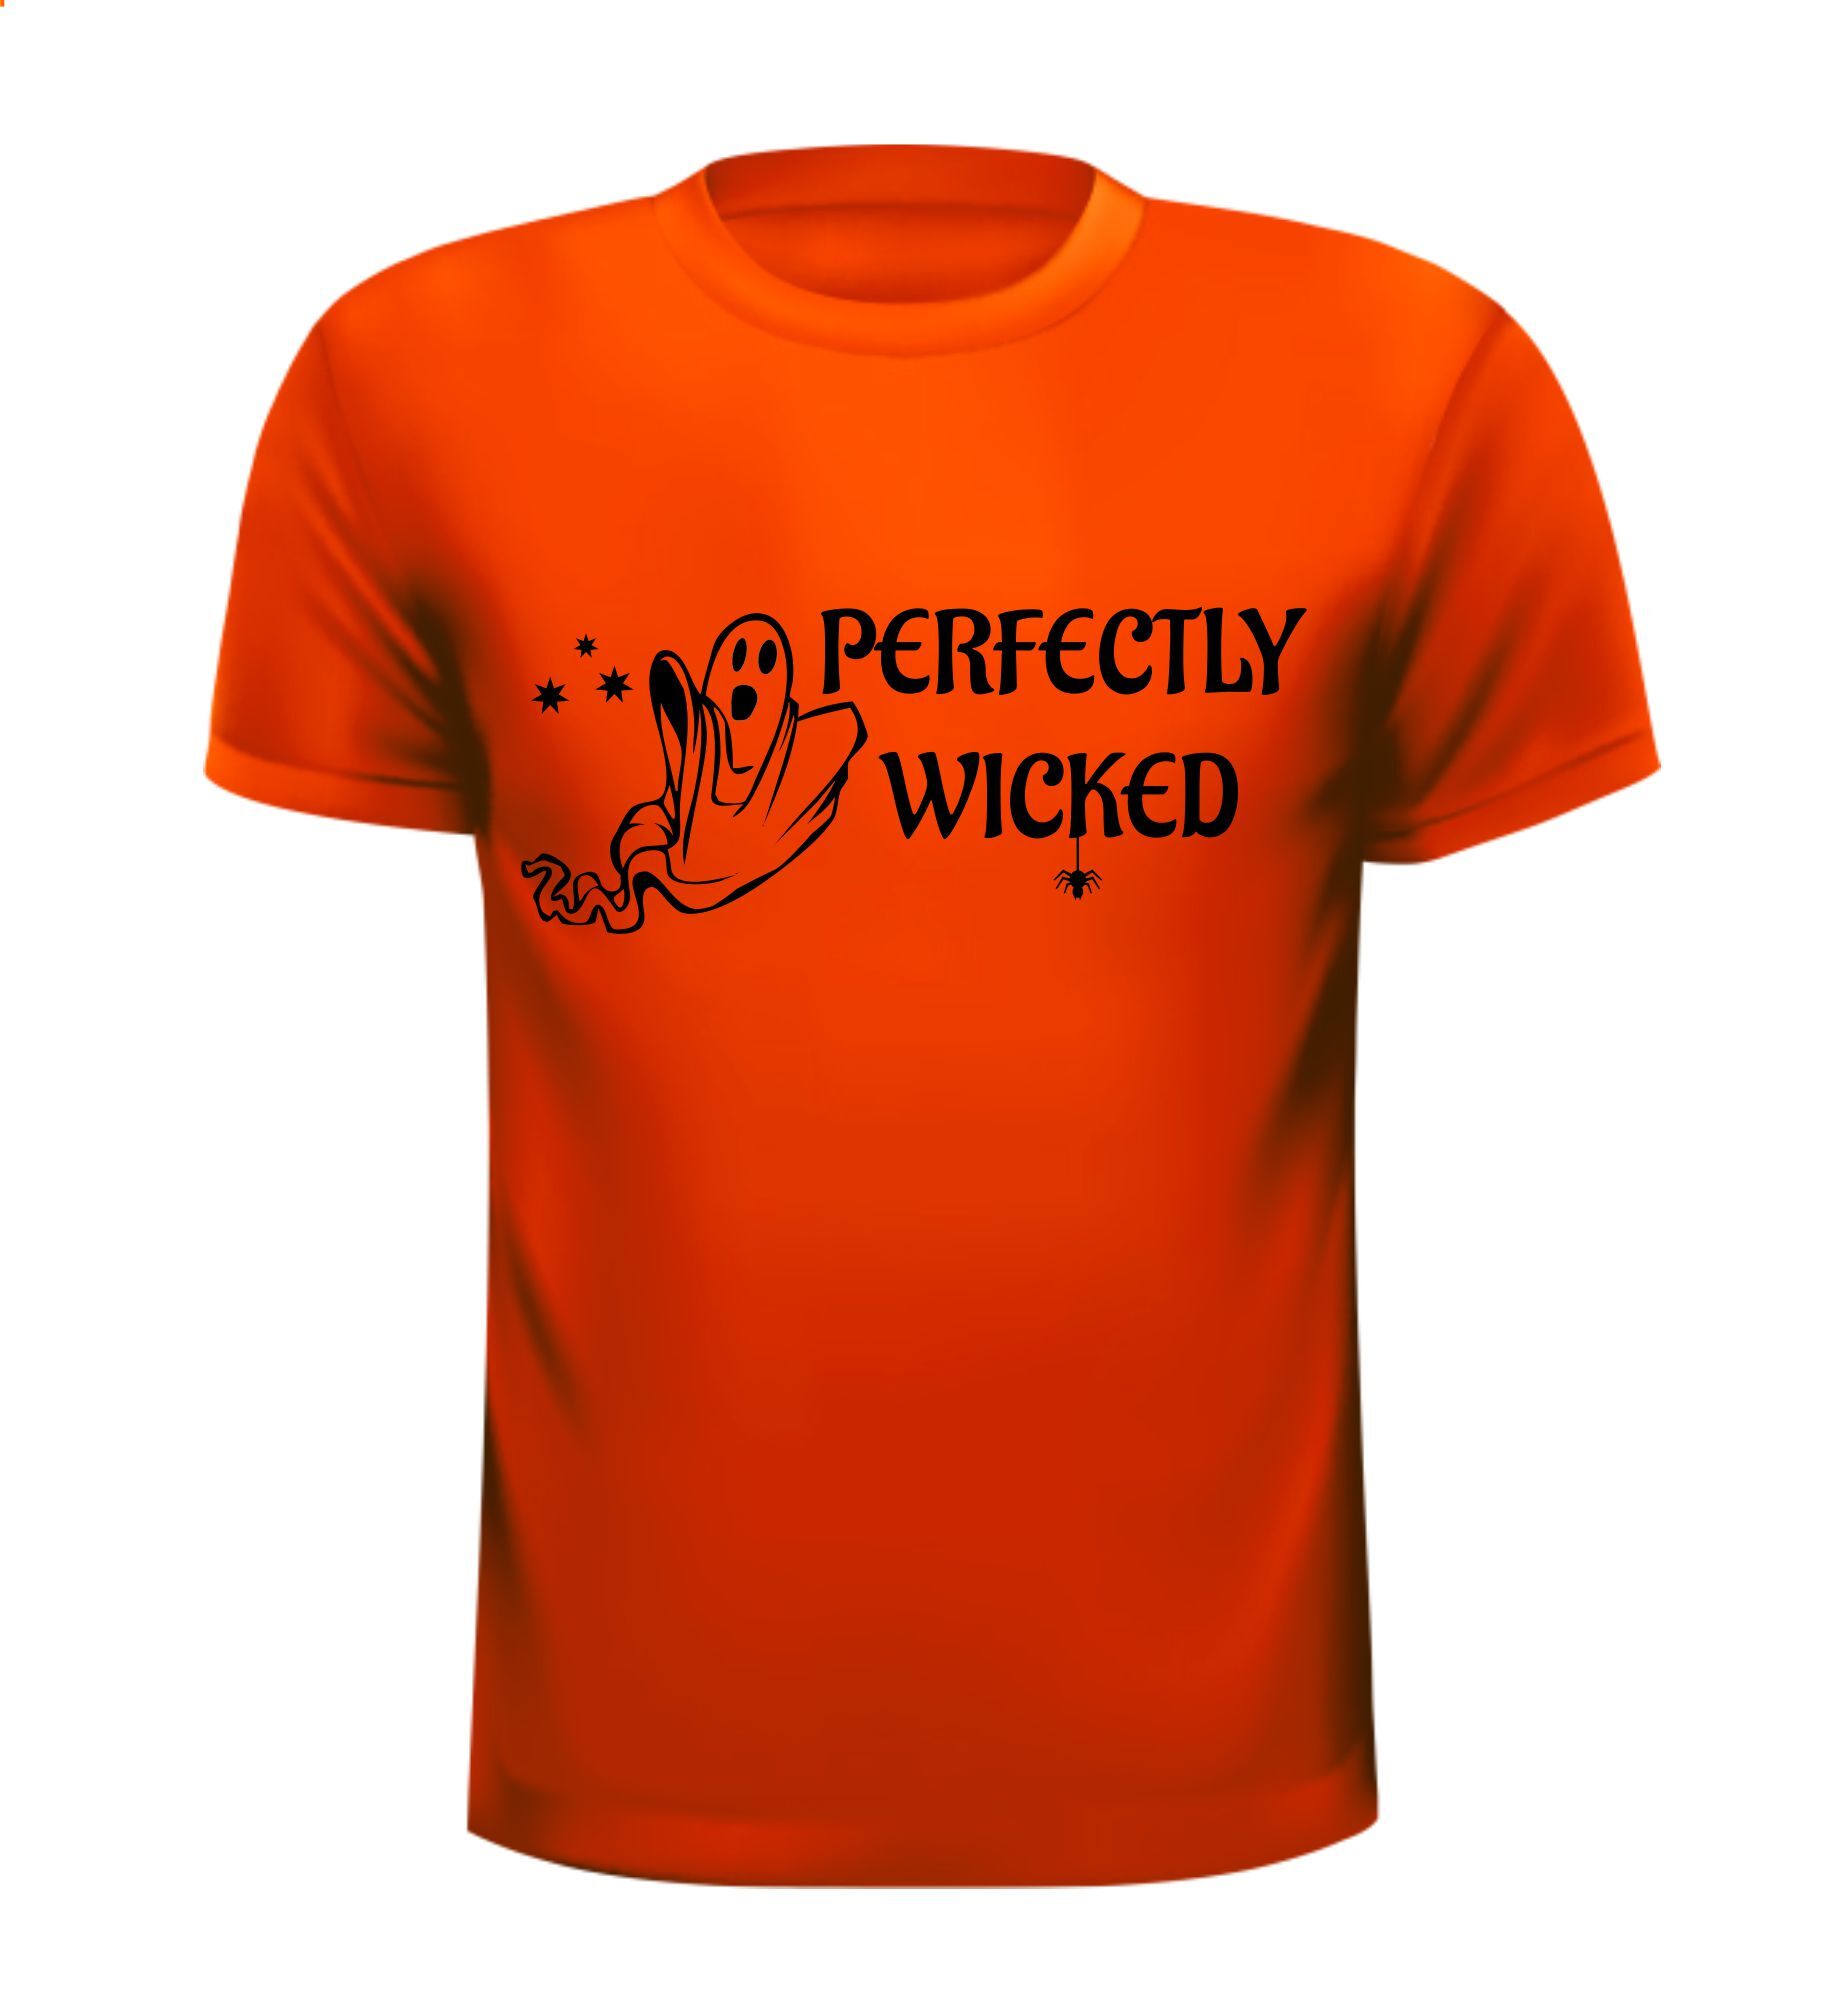 T-shirt  perfectly wicked perfect slecht Halloween geest spook